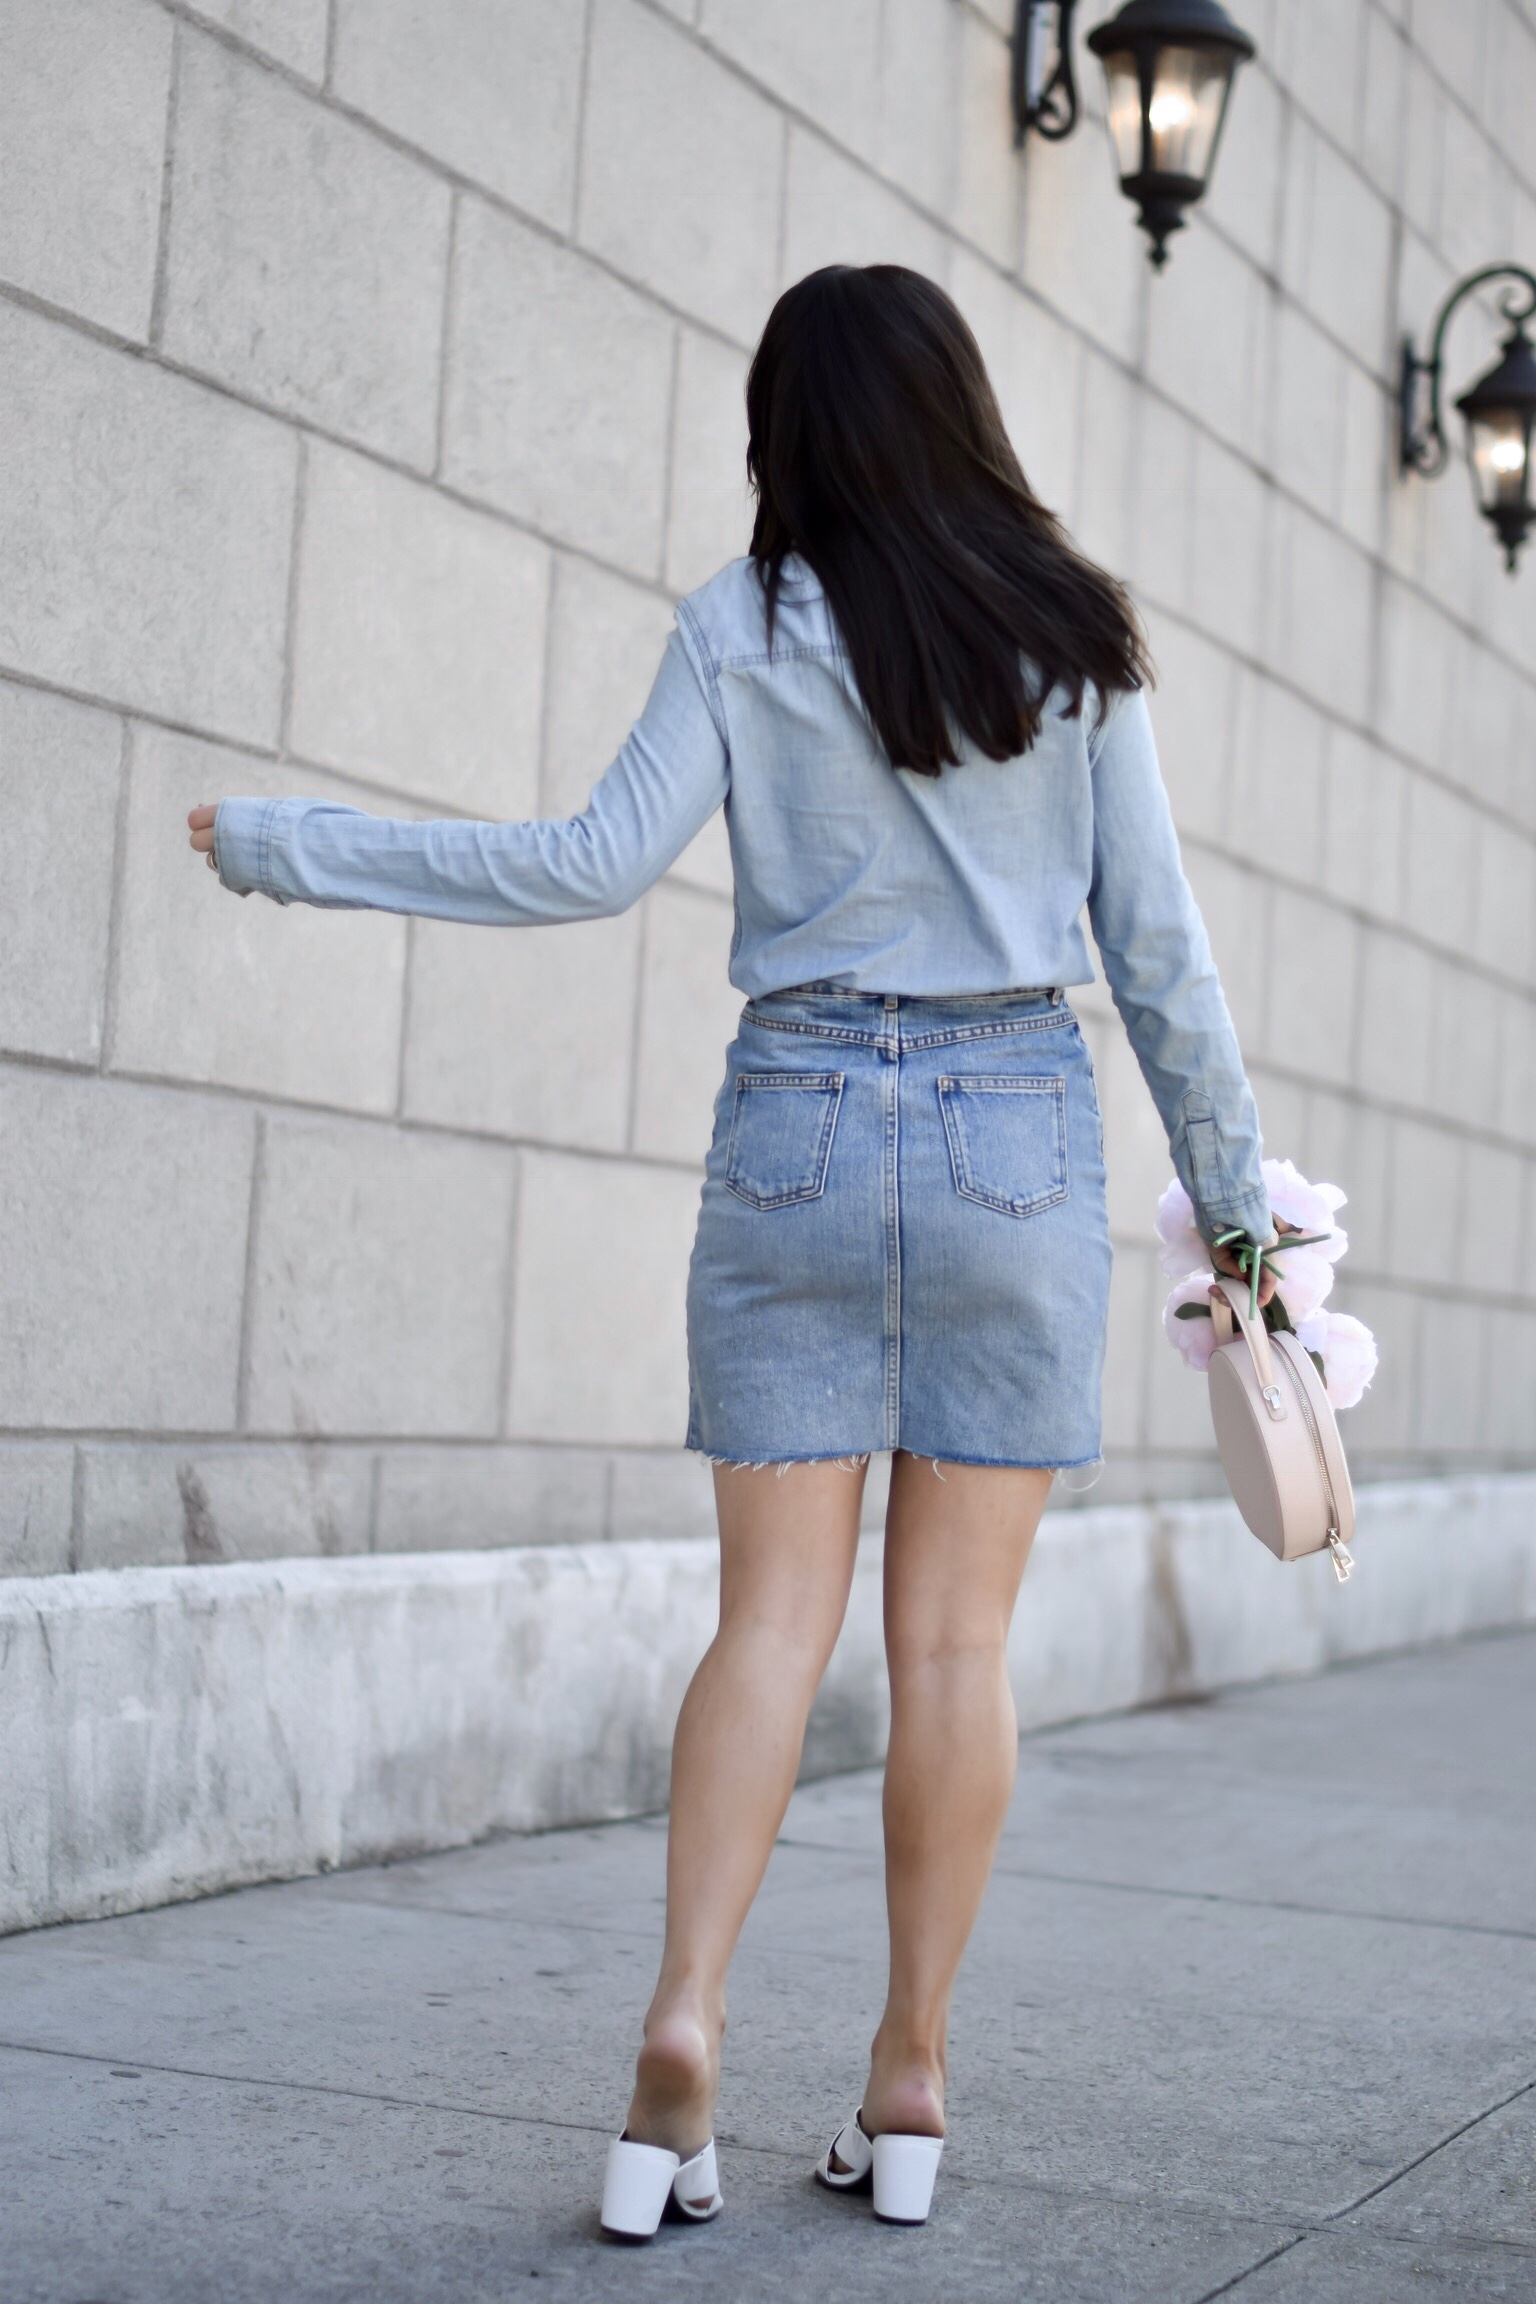 Do You Need Money To Be A Blogger Canadian Tuxedo White Mules Esther Santer Fashion Blog NYC Street Style Blogger Outfit OOTD Trendy Denim Skirt Jean Shirt Gap ASOS Shoes Girl Women Gold Hoops How To Wear Shop Buy Pretty New York City  Pink Circle Bag.jpg